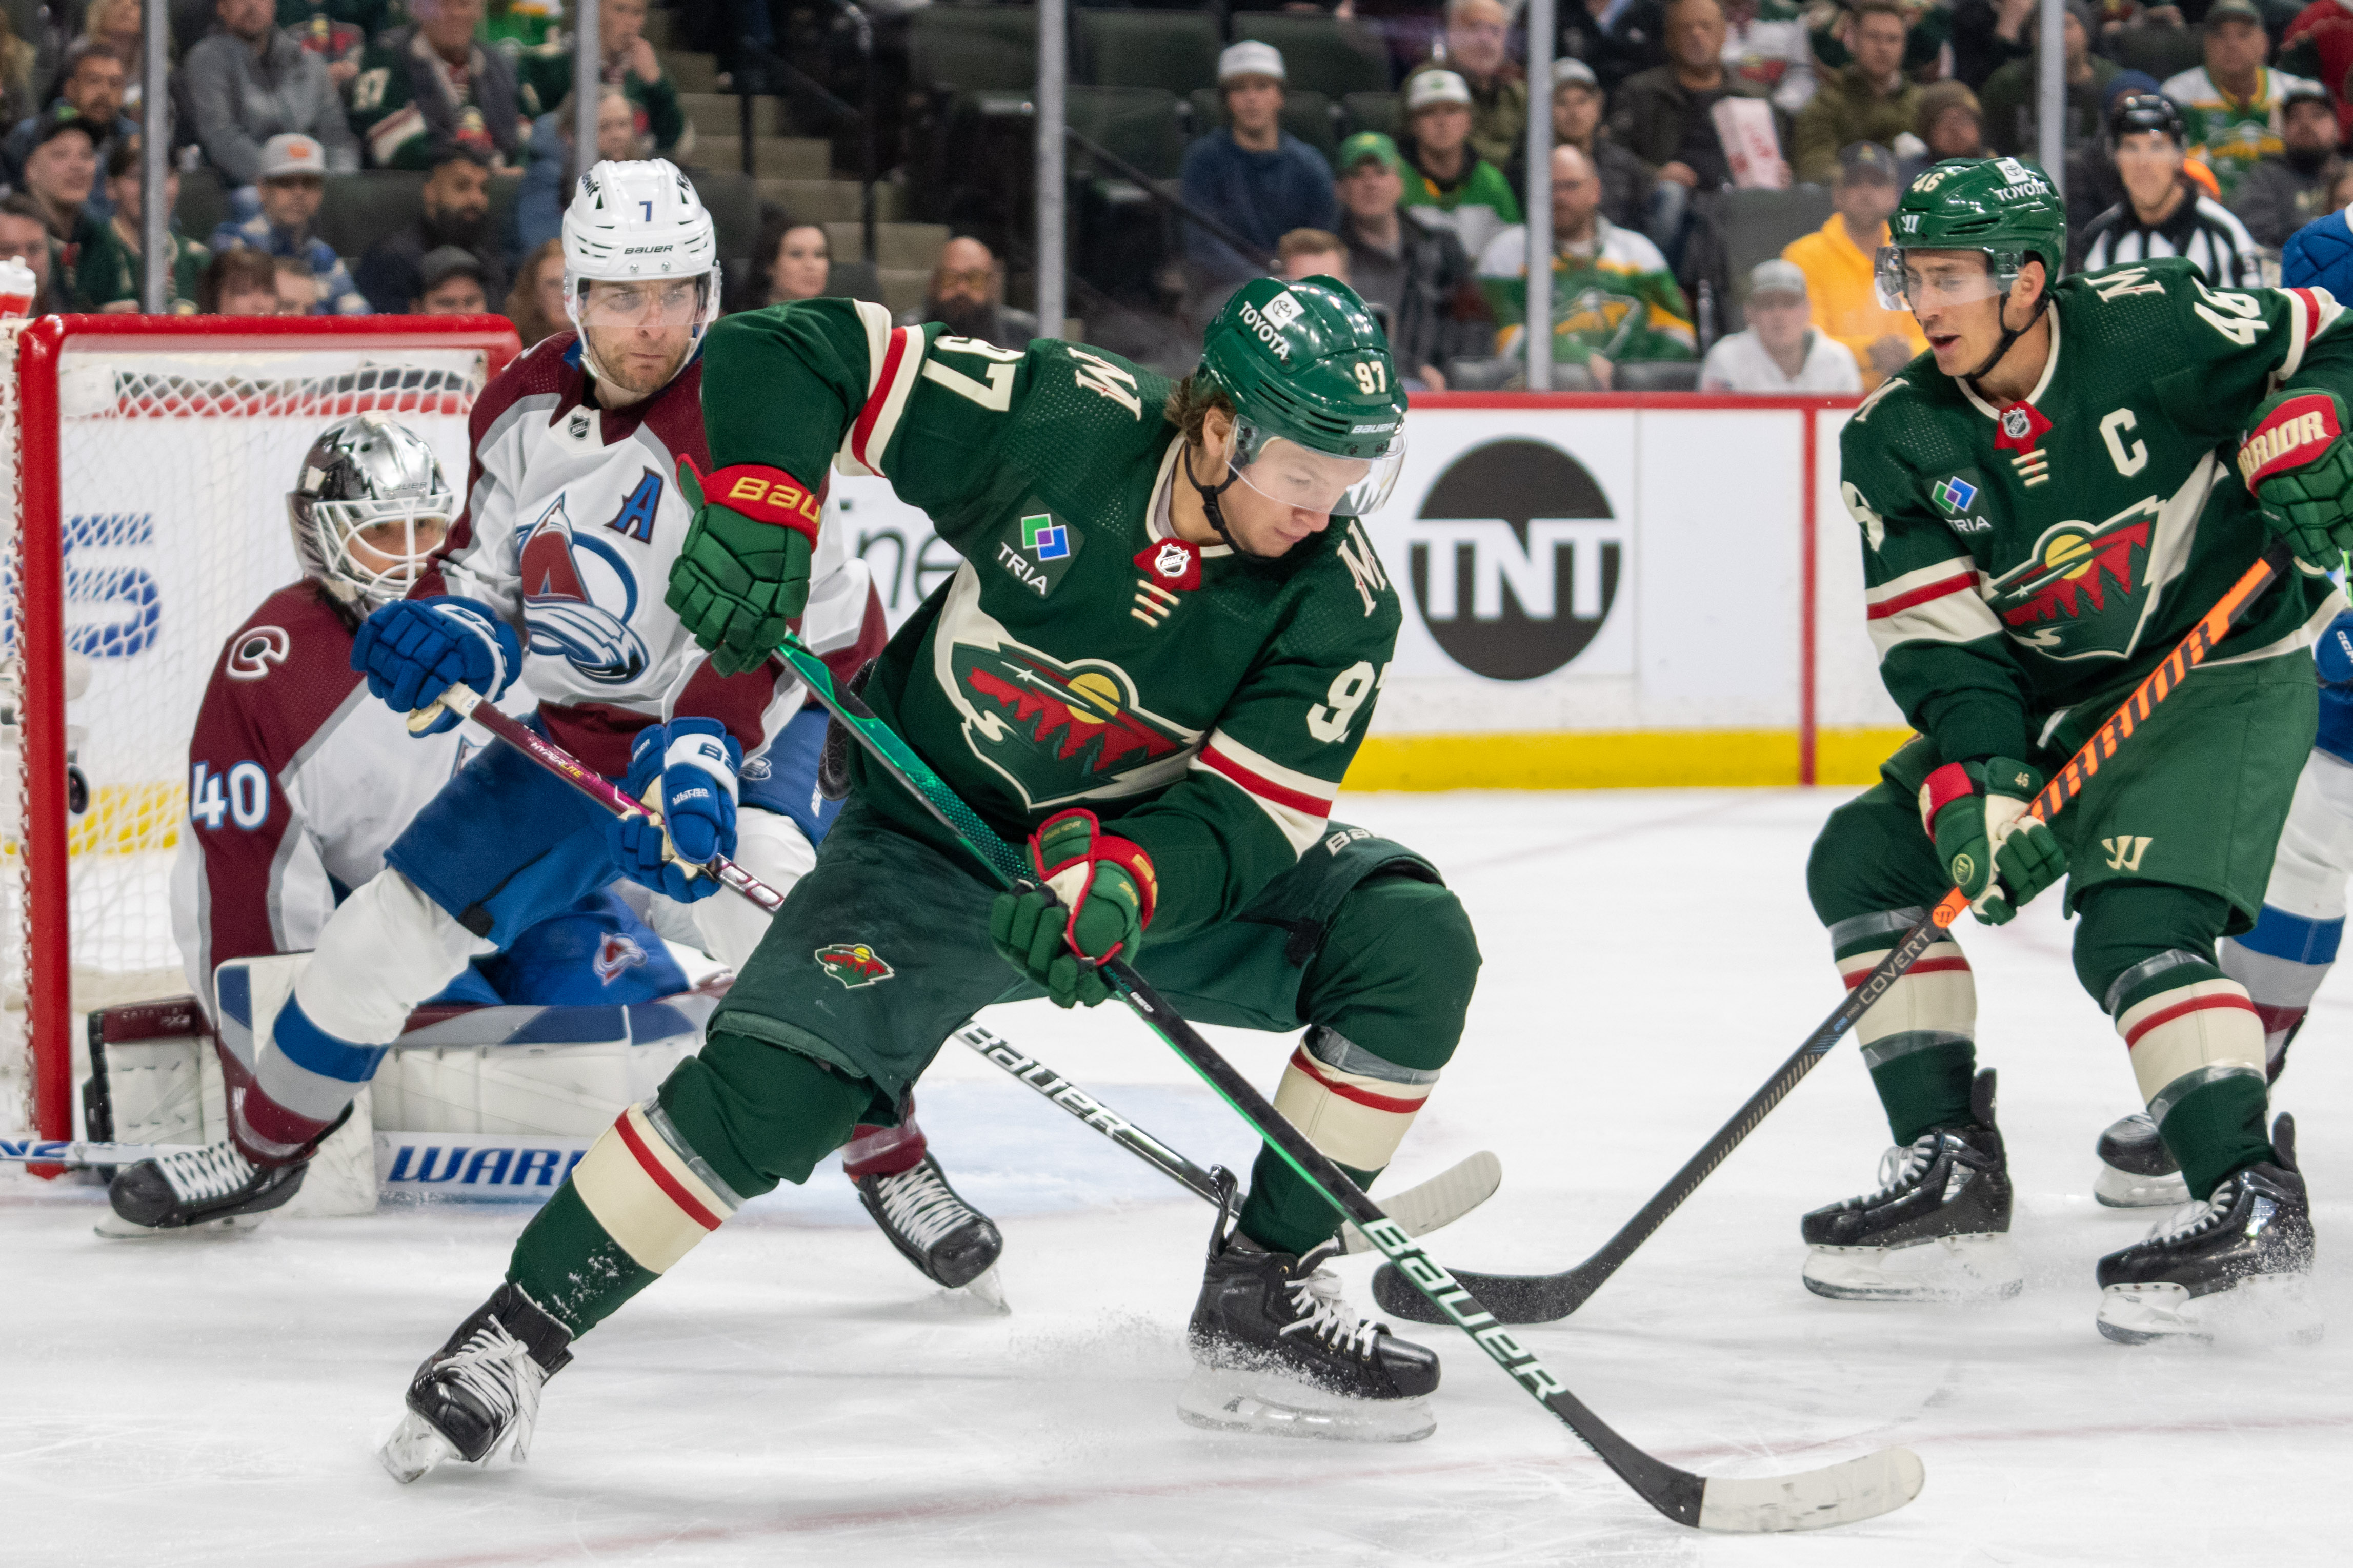 Stars-Wild live stream: Start time, TV channel, how to watch Game